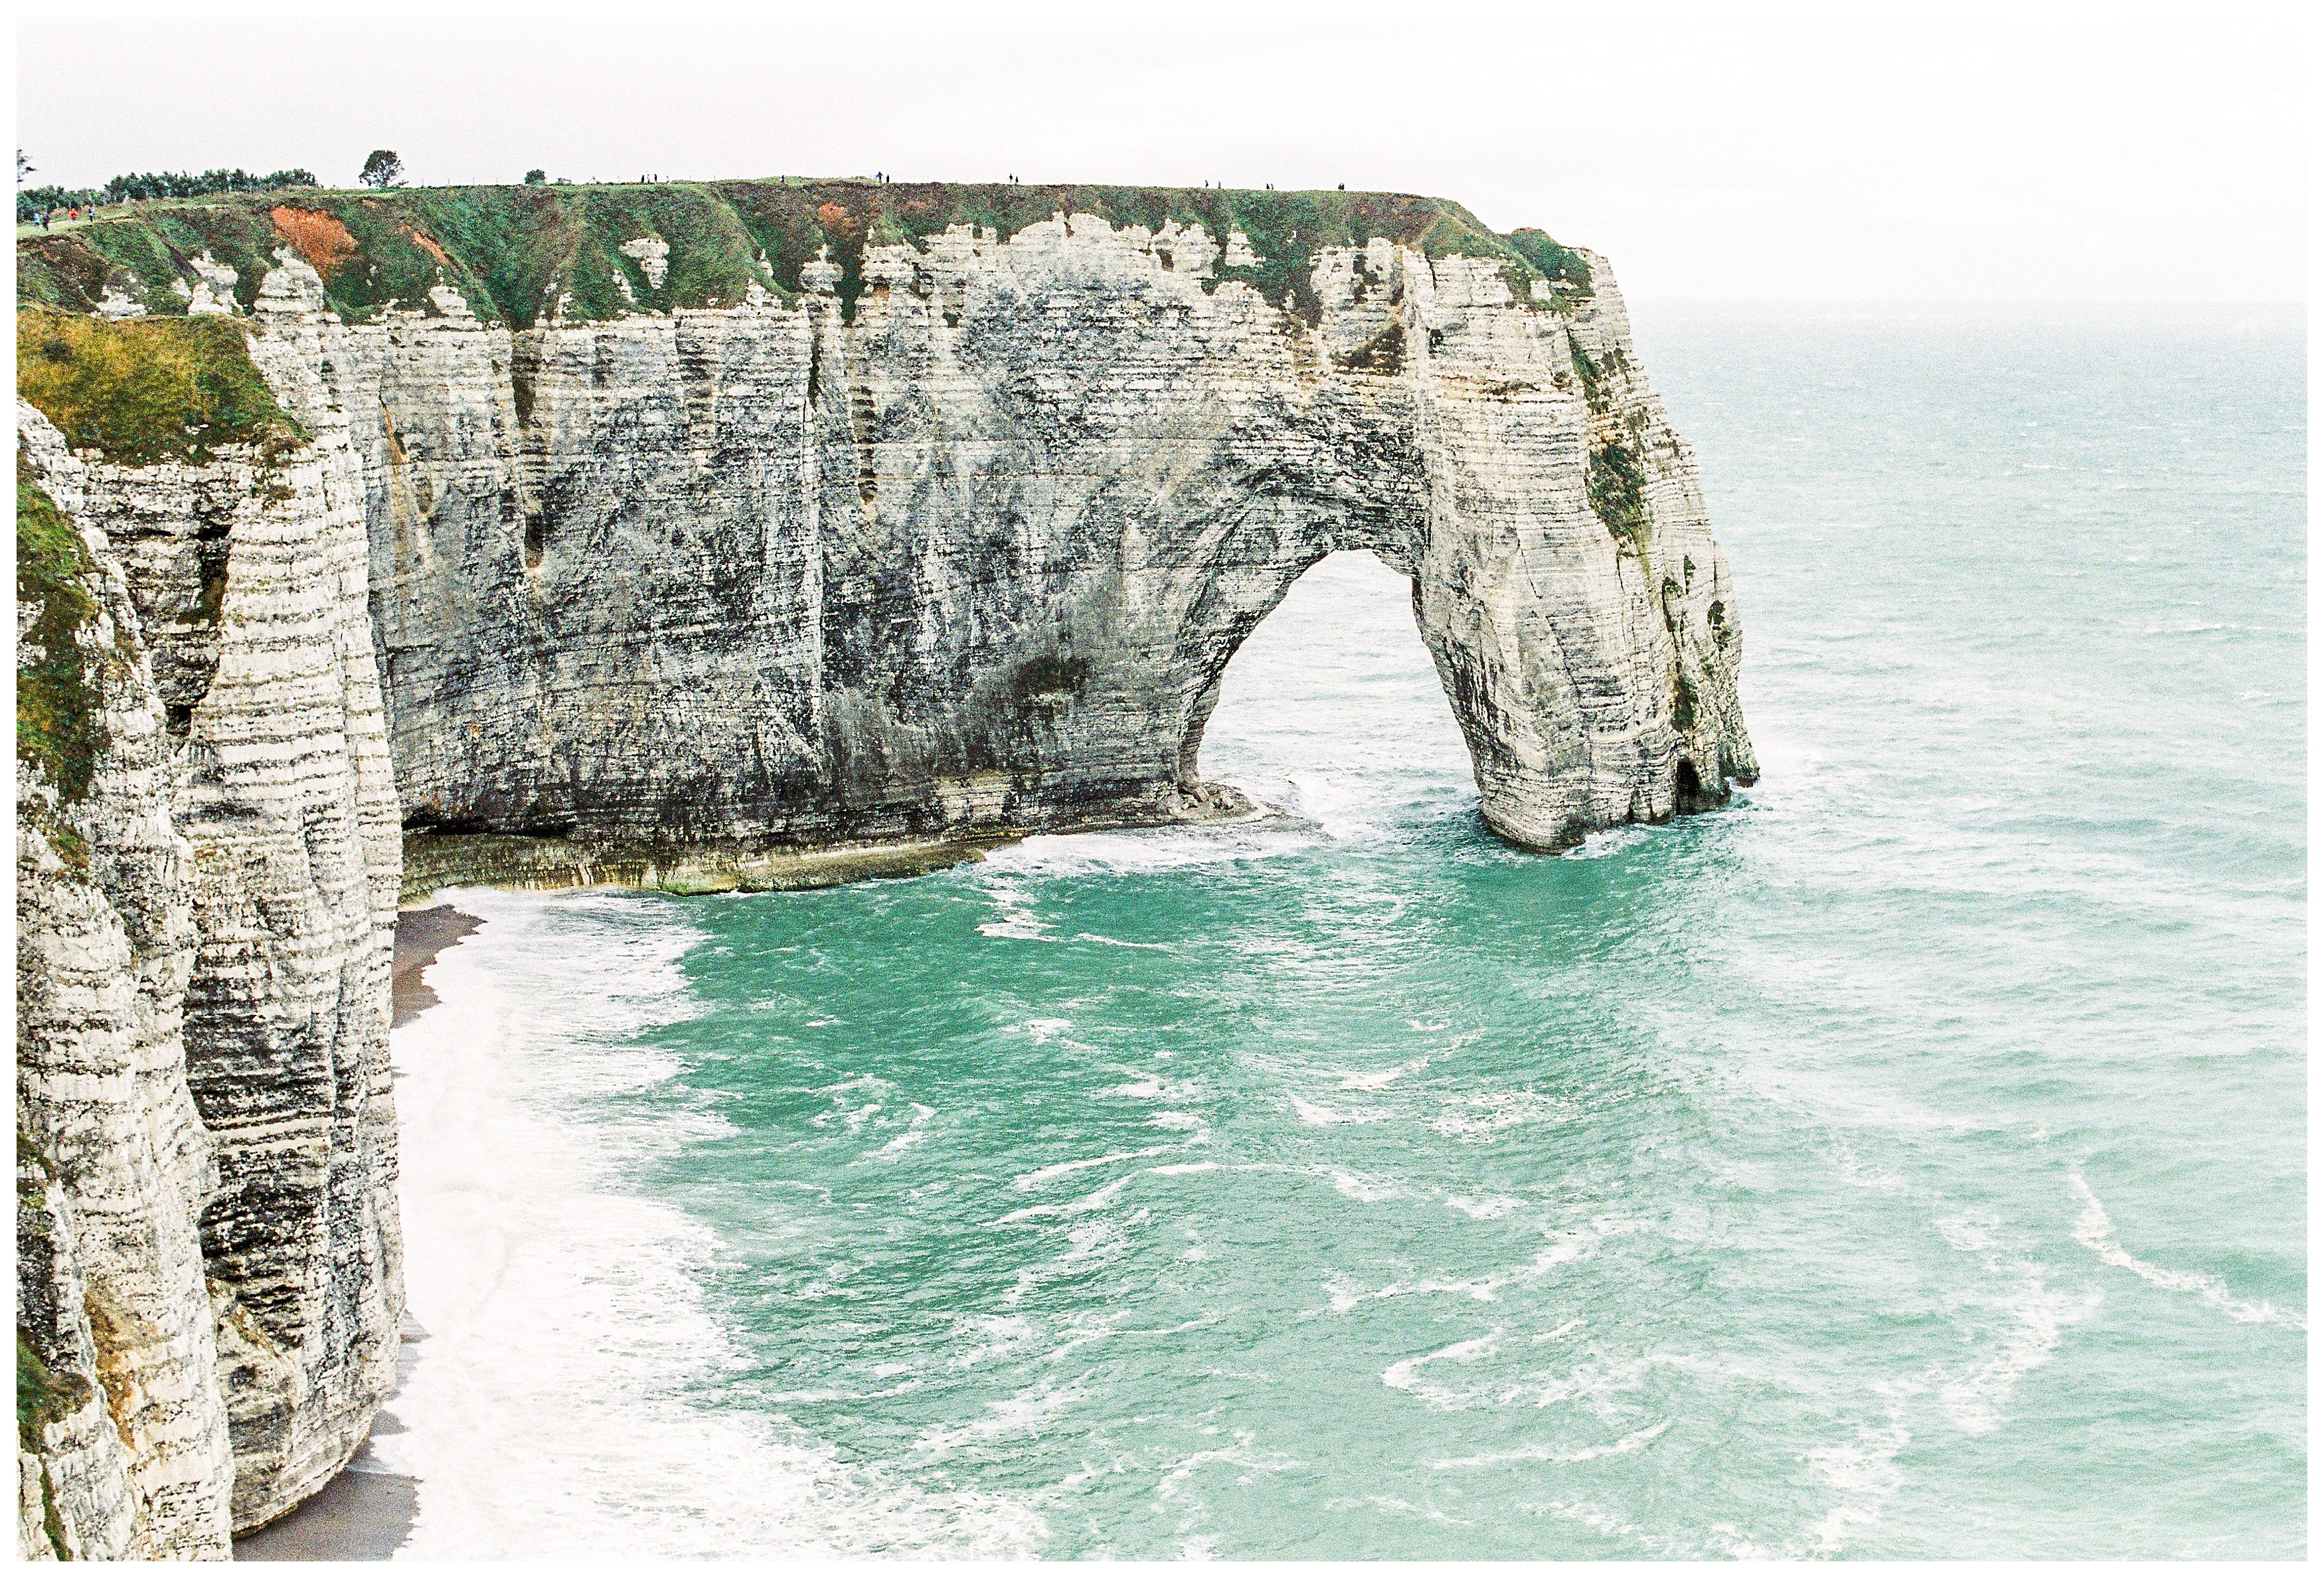 the famous arched cliff of etretat, normandy, france 